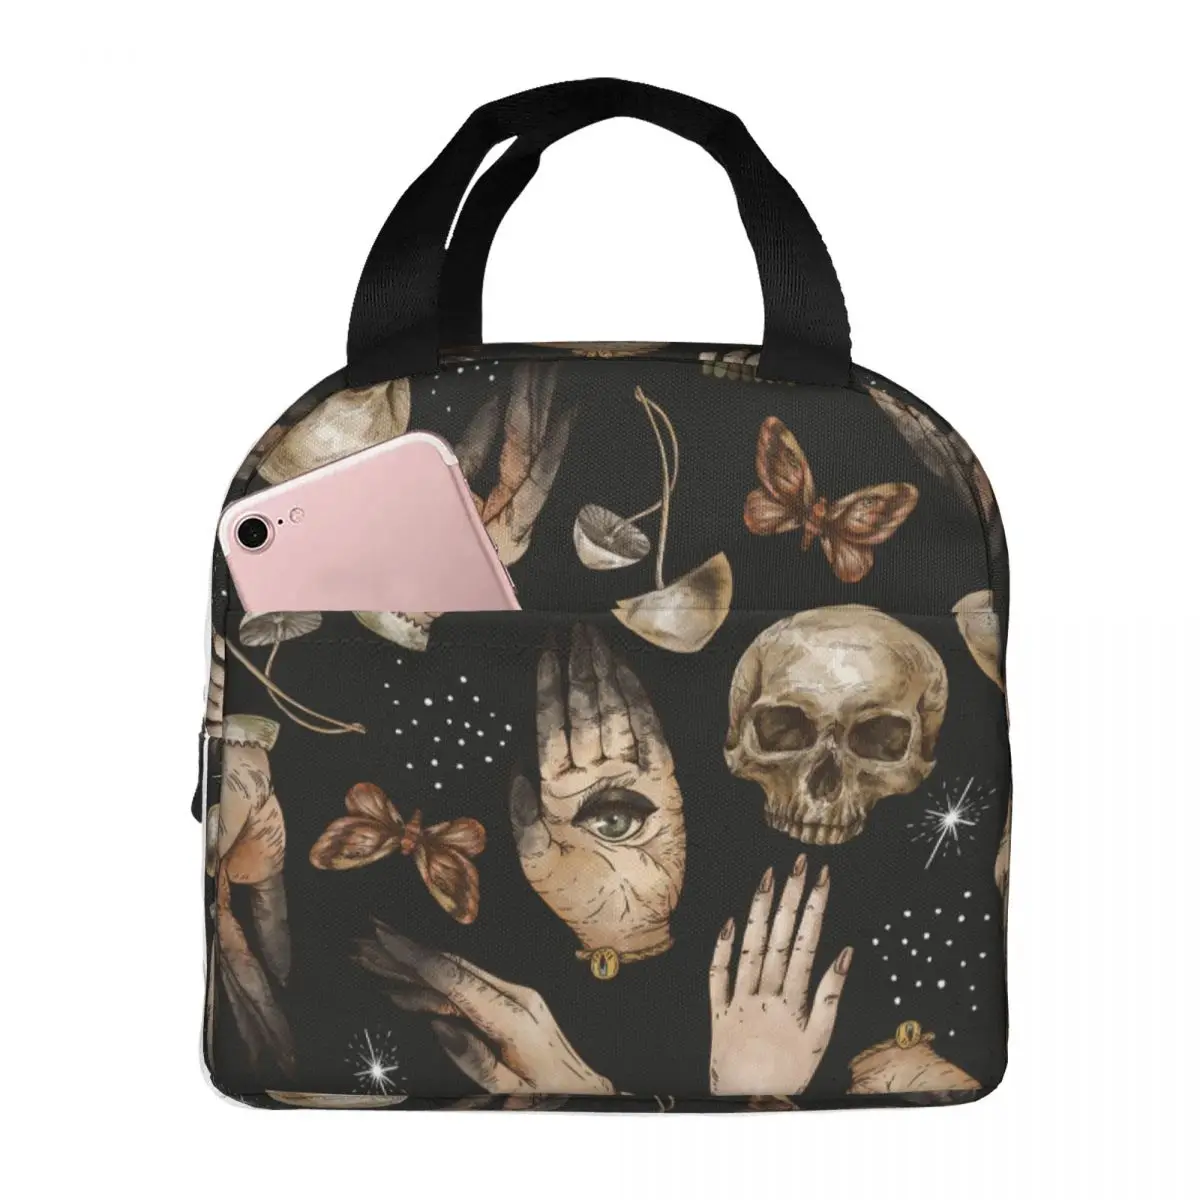 Magical Skull Witch Hands Moth Mushroom Lunch Bag Portable Insulated Oxford Cooler Thermal Picnic Lunch Box for Women Children